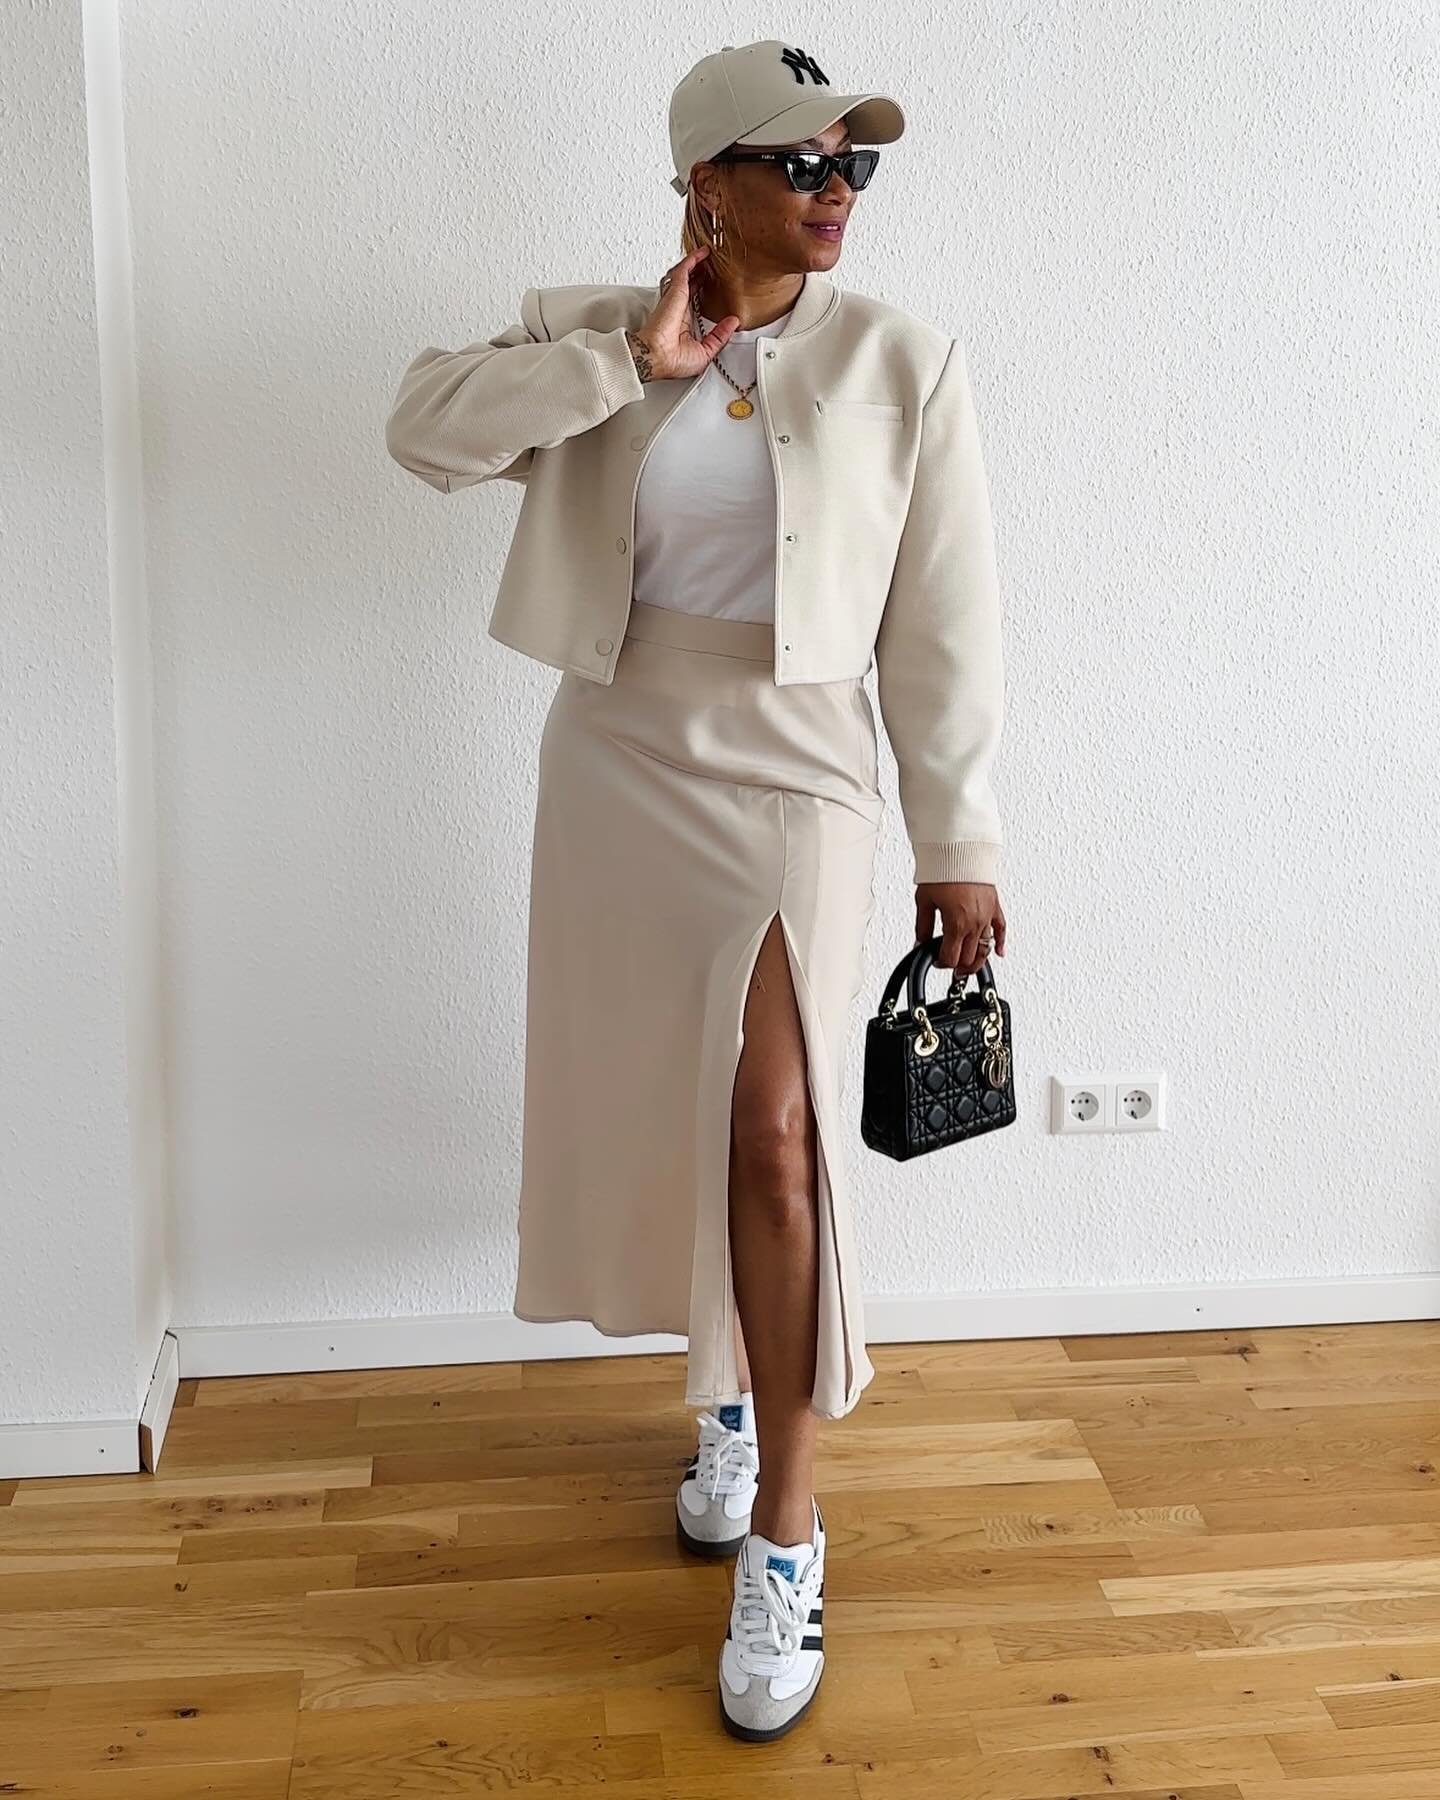 Styling a monochrome look for work today and its a mixed vibe&hellip;Girly, chic, with a lil bit of cool😎 

I hadn&rsquo;t done too many crop jackets in the past. I&rsquo;ve always felt like with my body type, it just didn&rsquo;t go with things the